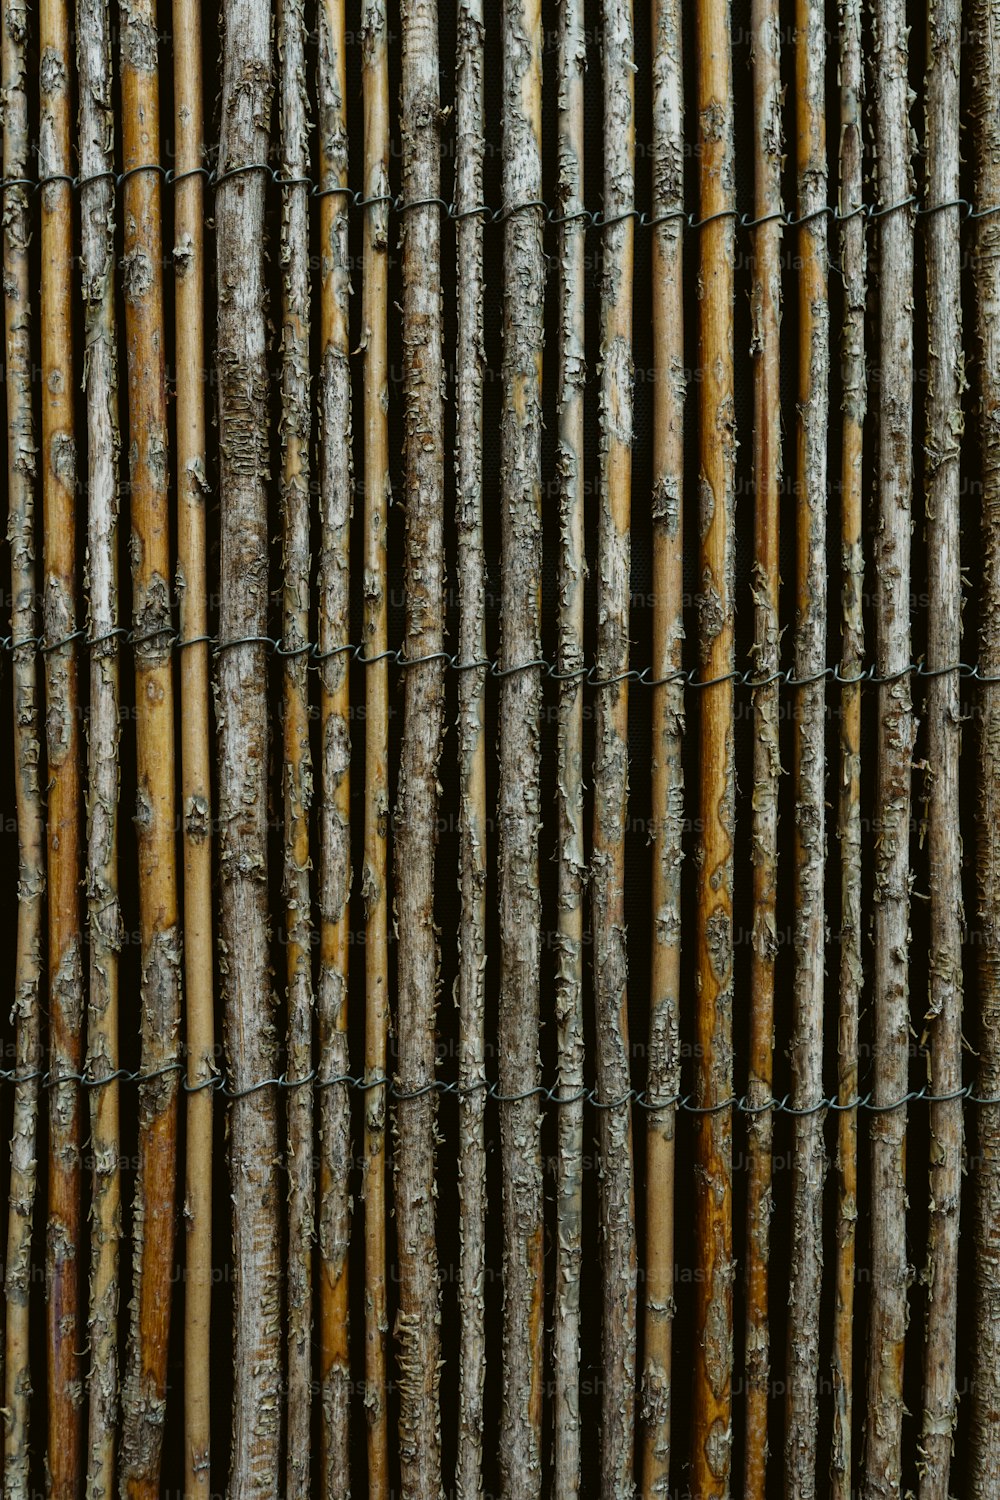 a close up view of a bamboo fence